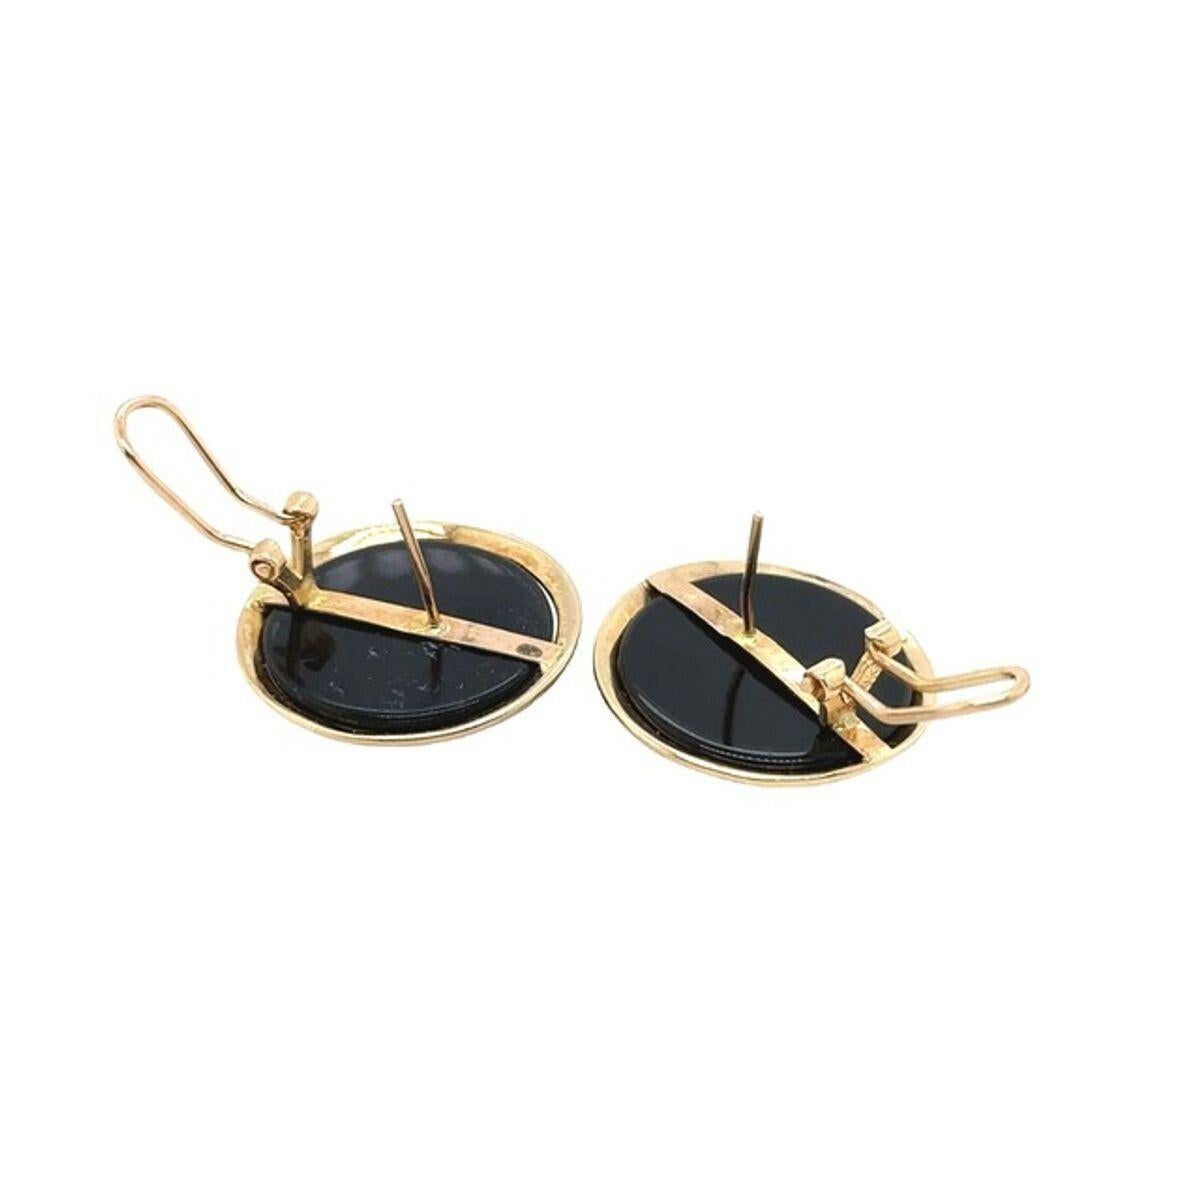 Natural Cabochon Black Onyx Earrings Set in 14ct Yellow Gold In Excellent Condition For Sale In London, GB